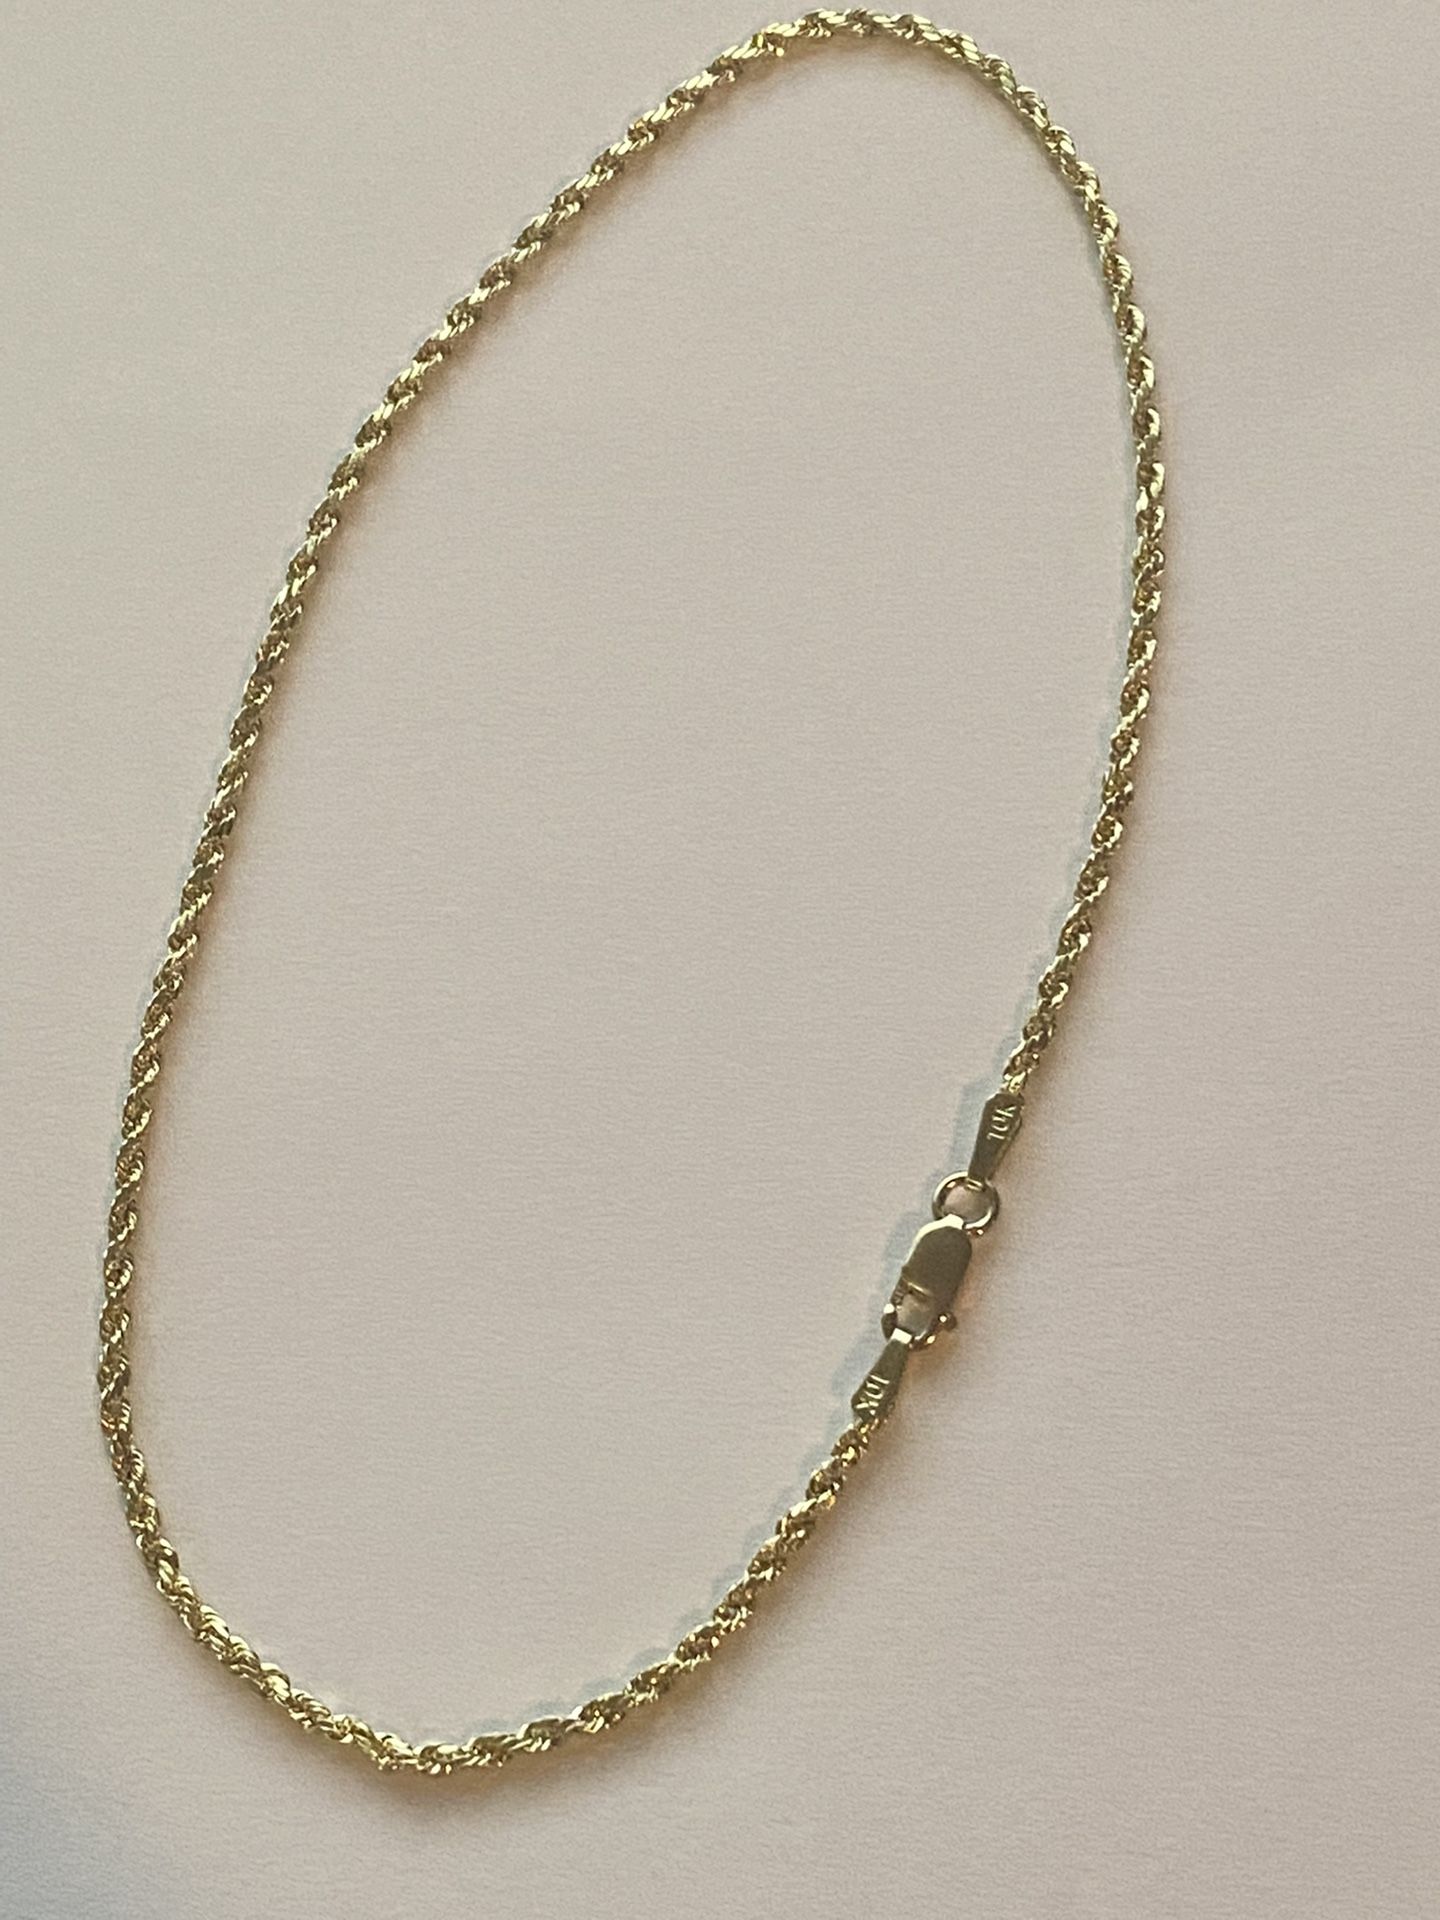 10k Real Gold Anklet 100% Pure Gold 2.5mm 